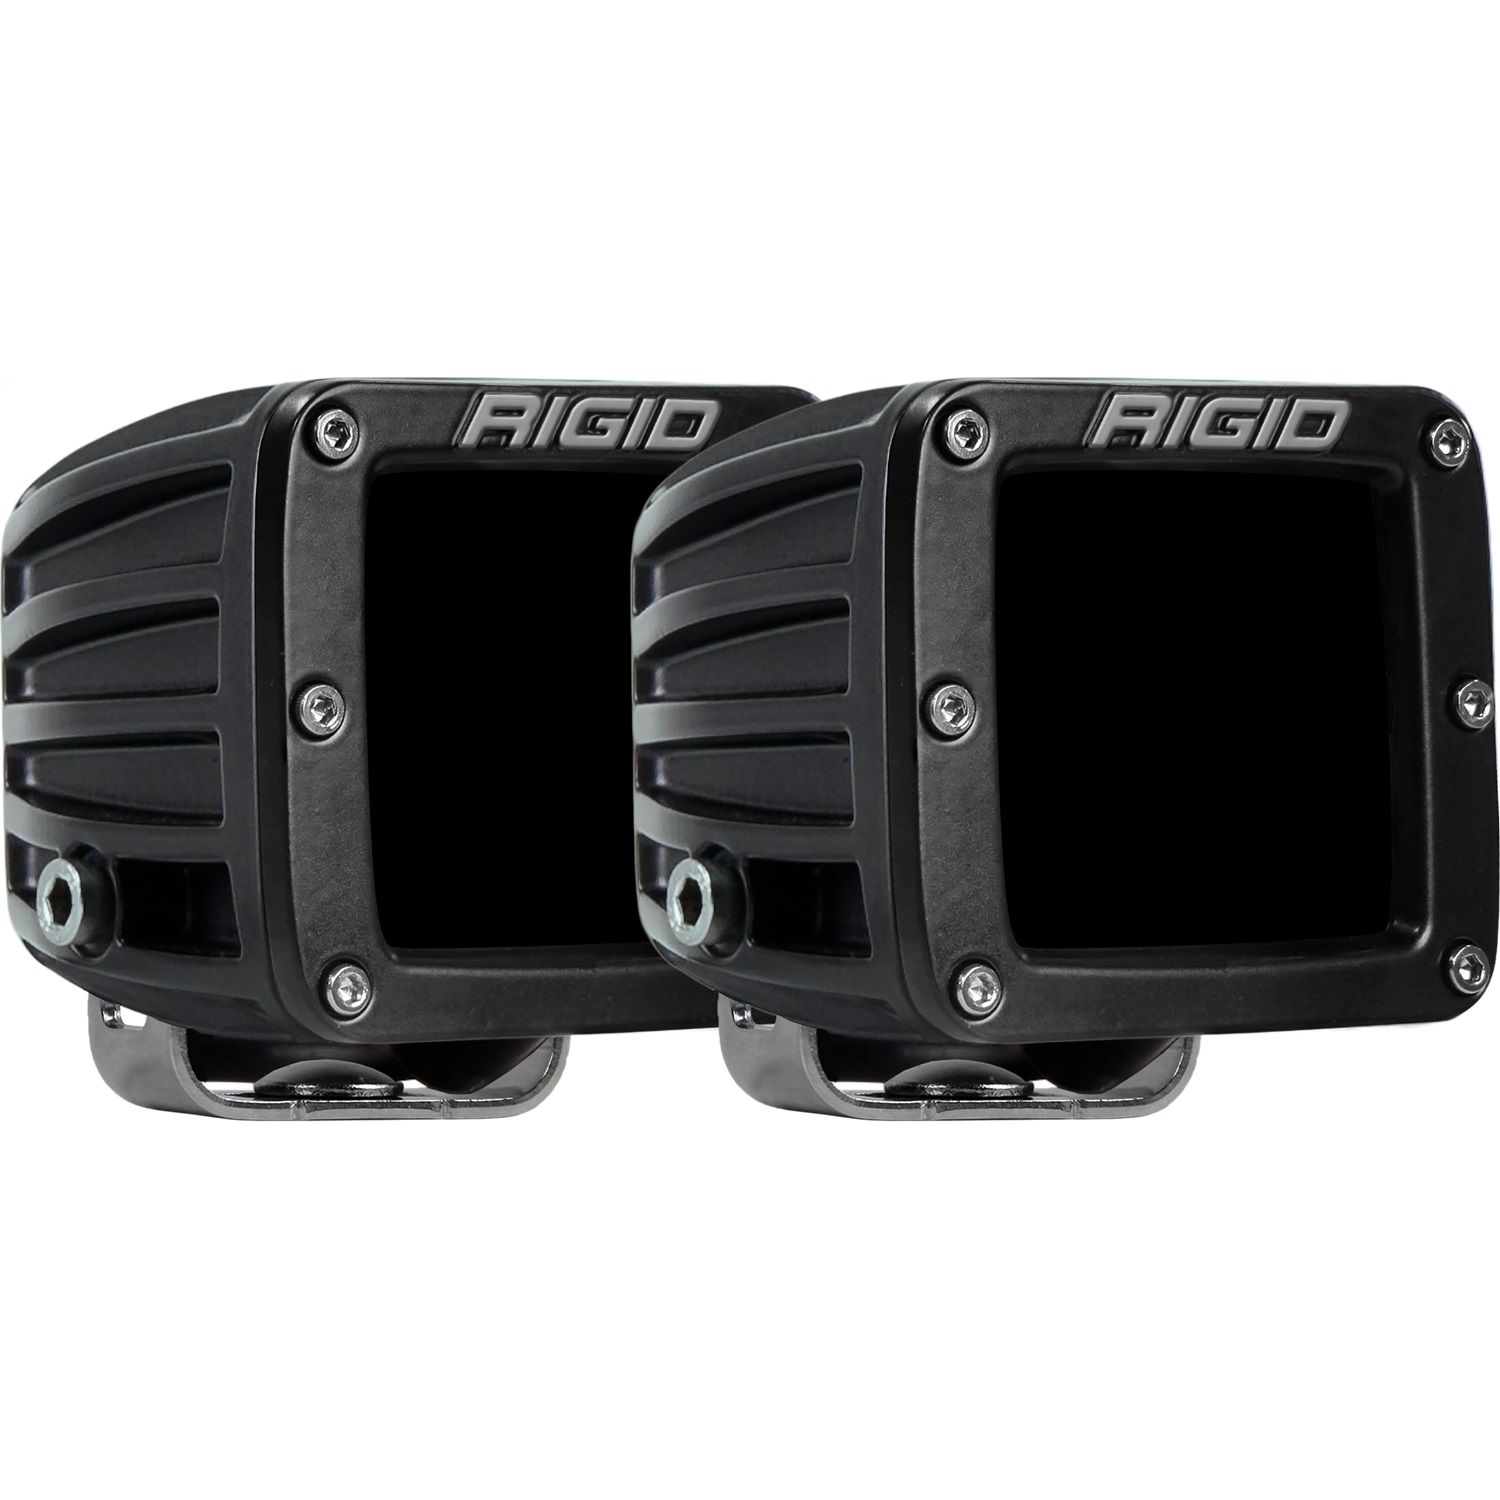 RIGID D-Series PRO LED Light, Driving Optic, Infrared, Surface Mount, Pair